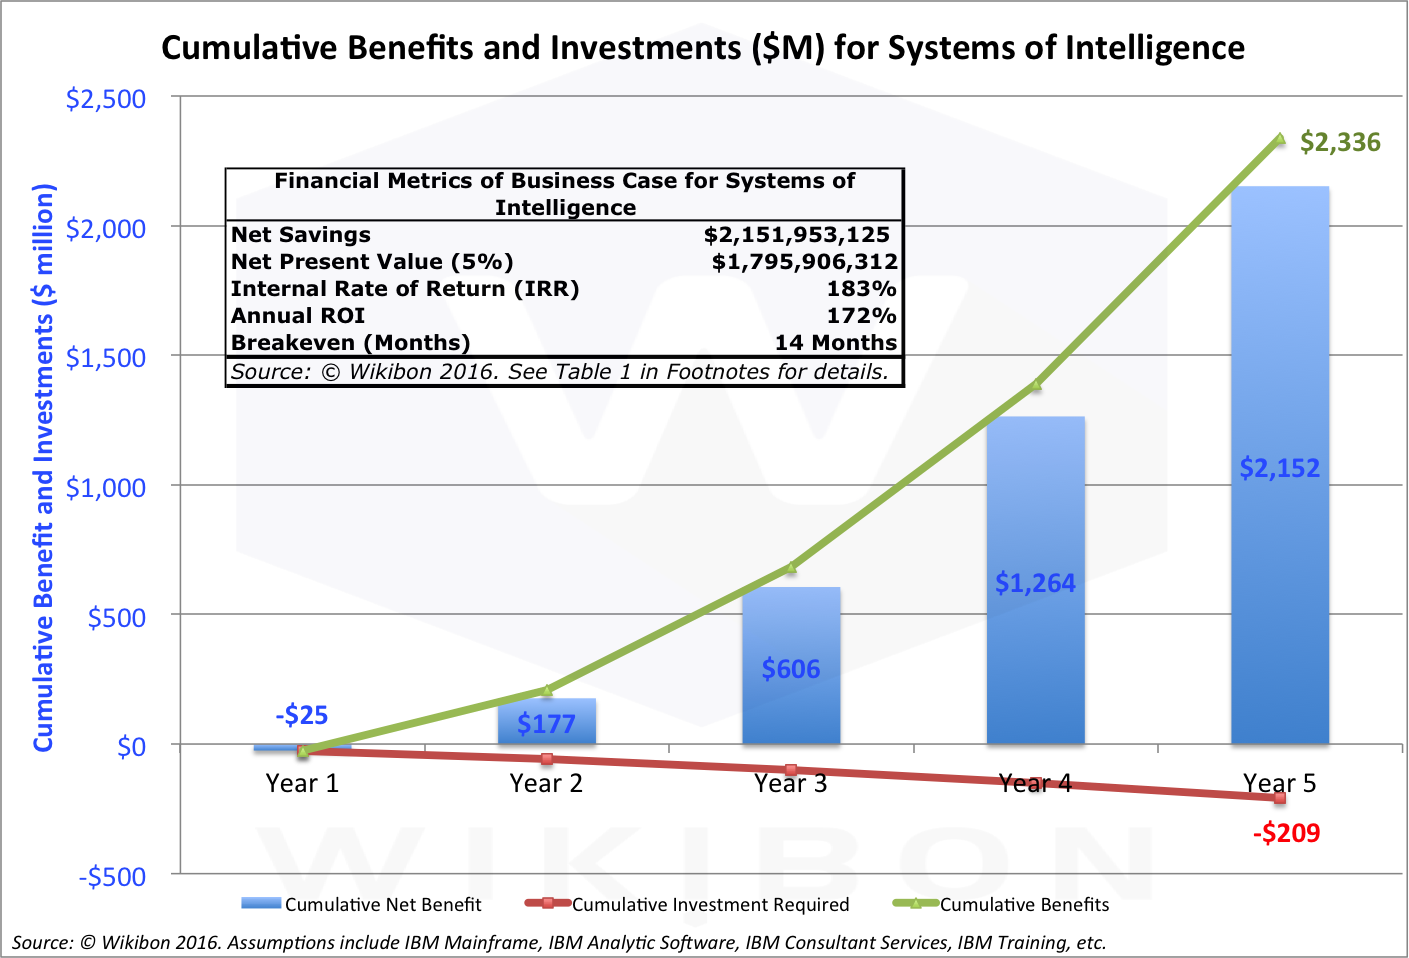 Figure 6 - Cumulative Investments, Cumulative Benefits and Overall Business Case for Inline Predictive Analytics and Systems of Intelligence Source: © Wikibon, 2016. See Table 1 and Table 2 in the Footnotes below for details of the assumptions and calculations.